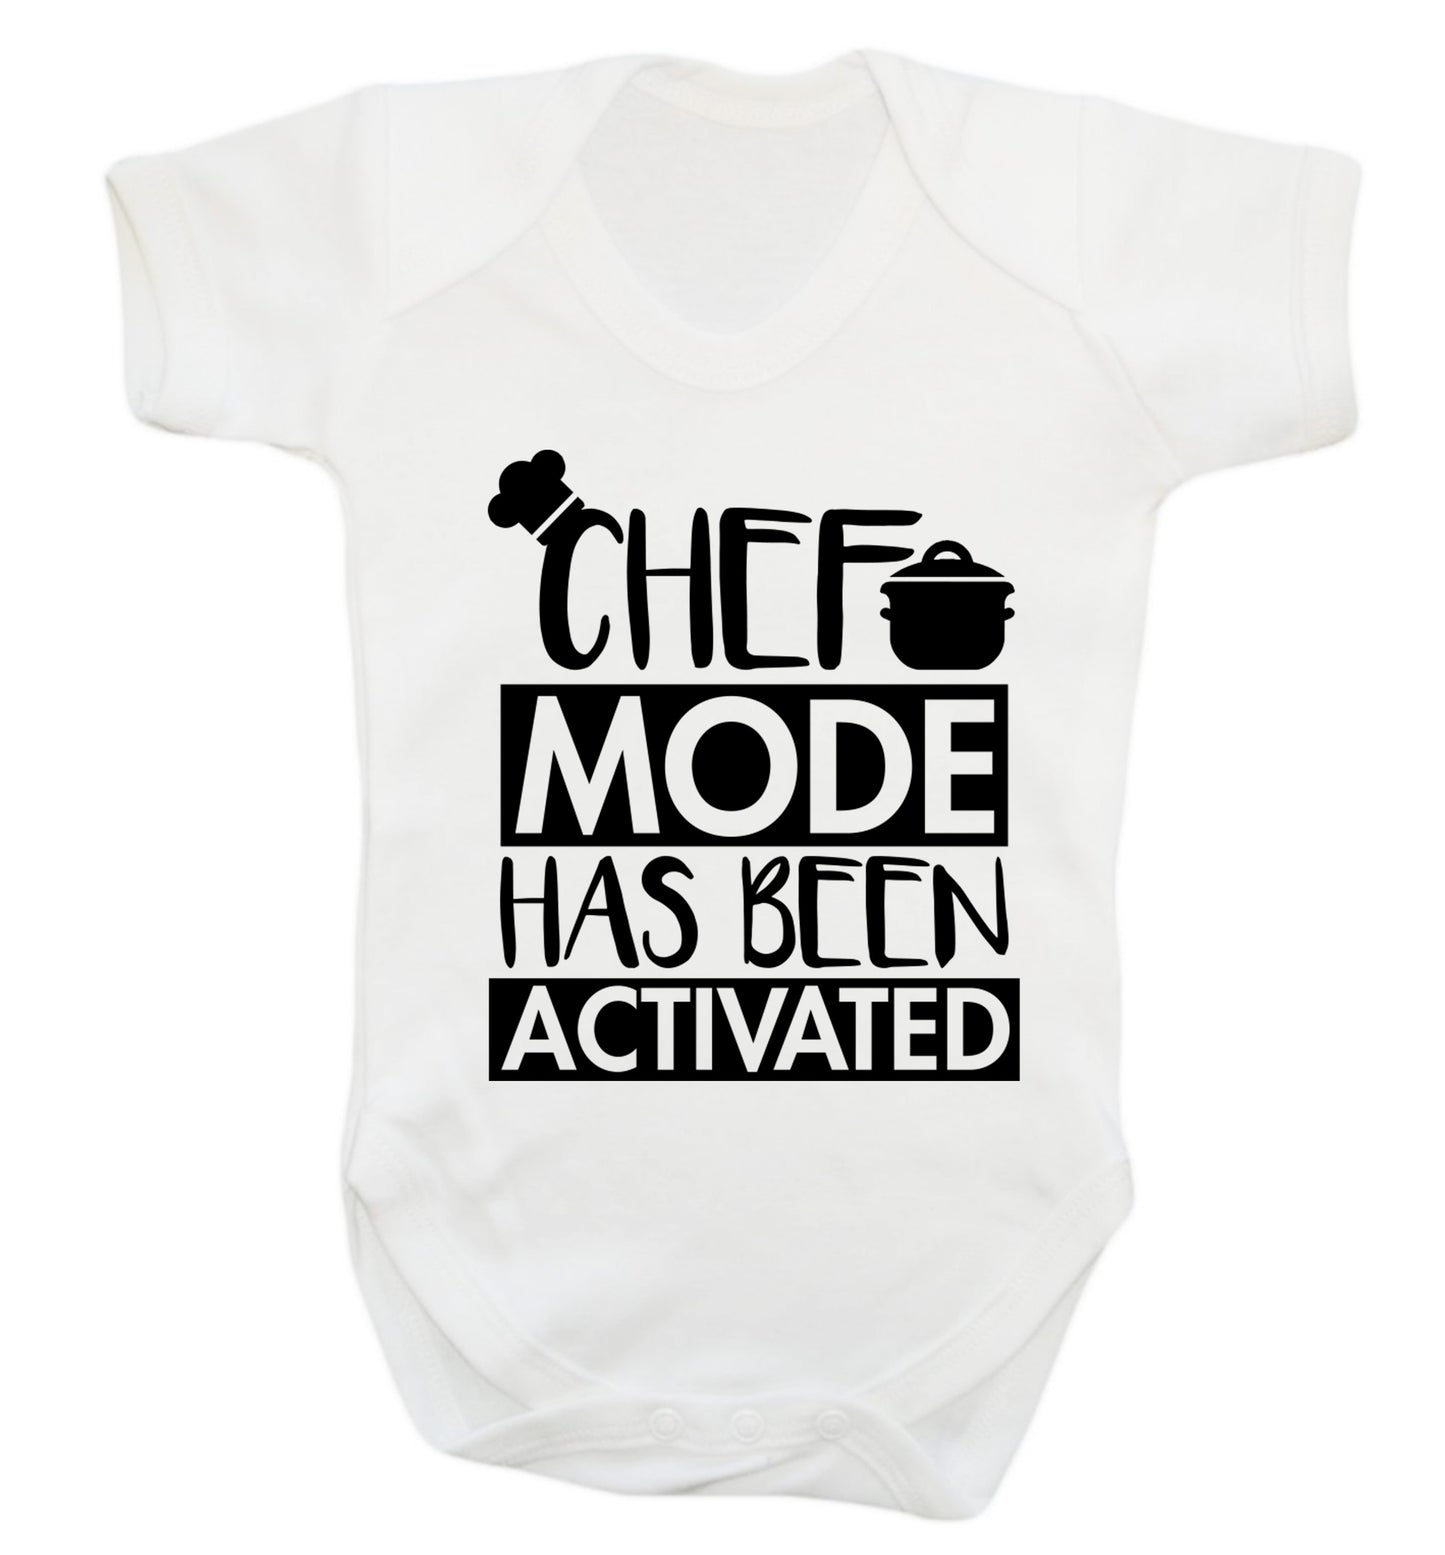 Chef mode has been activated Baby Vest white 18-24 months